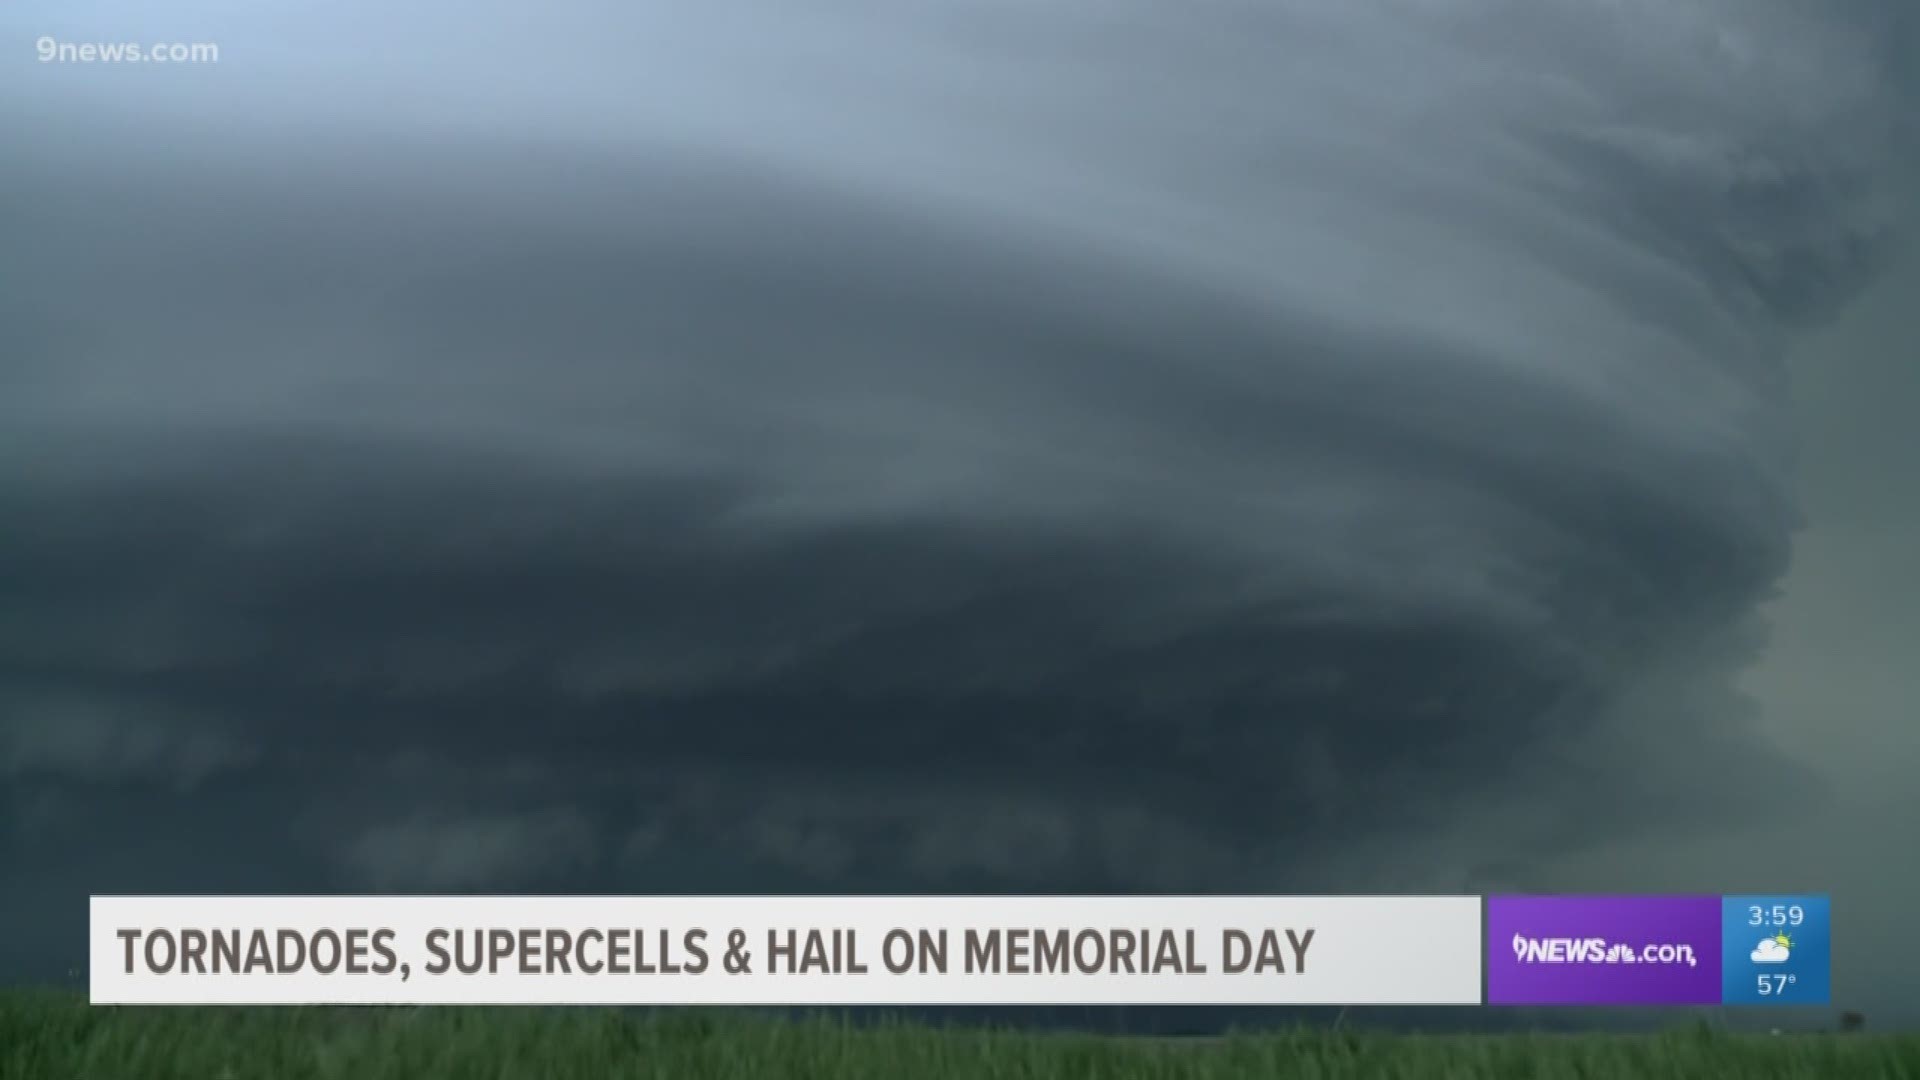 Meteorologist Cory Reppenhagen knew immediately it was the most impressive supercell he had ever witnessed in person.